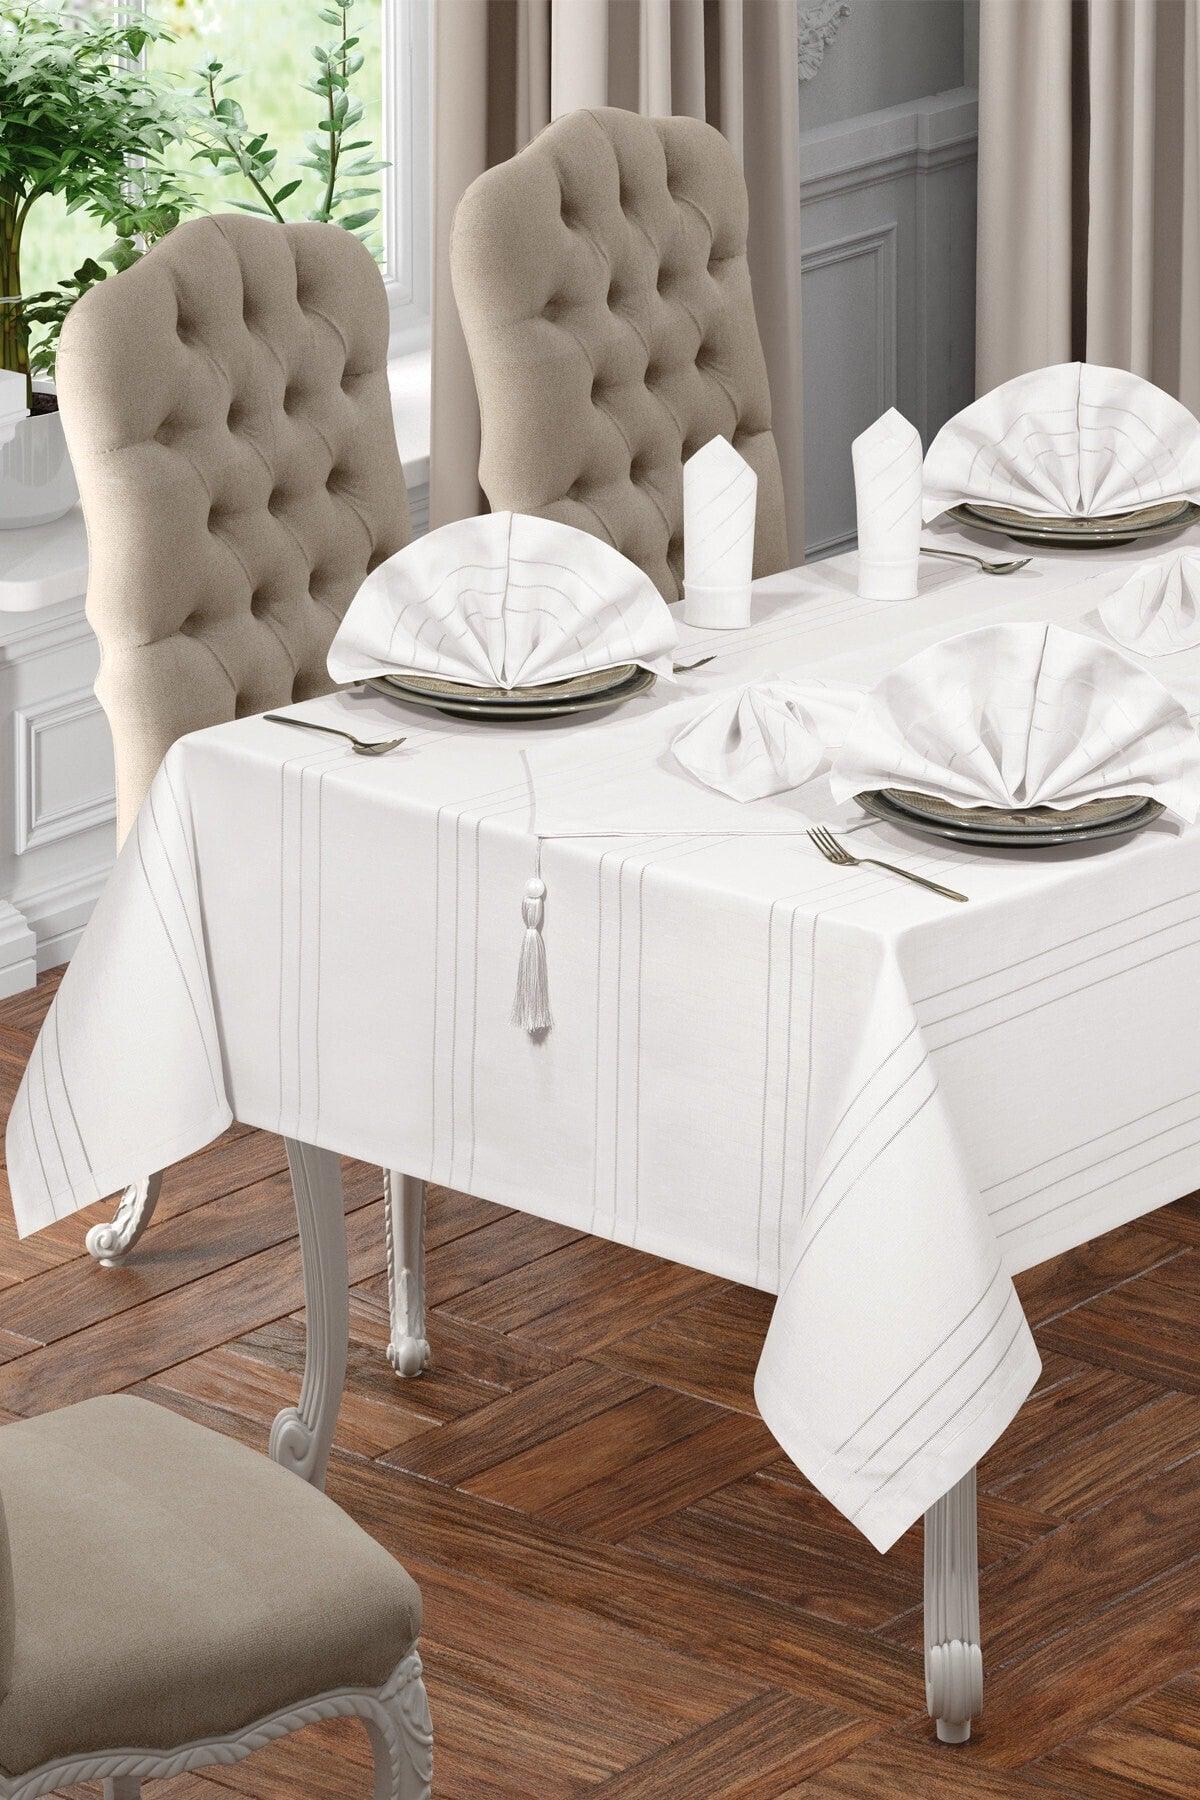 Luxury Colber Table Cloth Set 12 Person Colber (white) - Swordslife